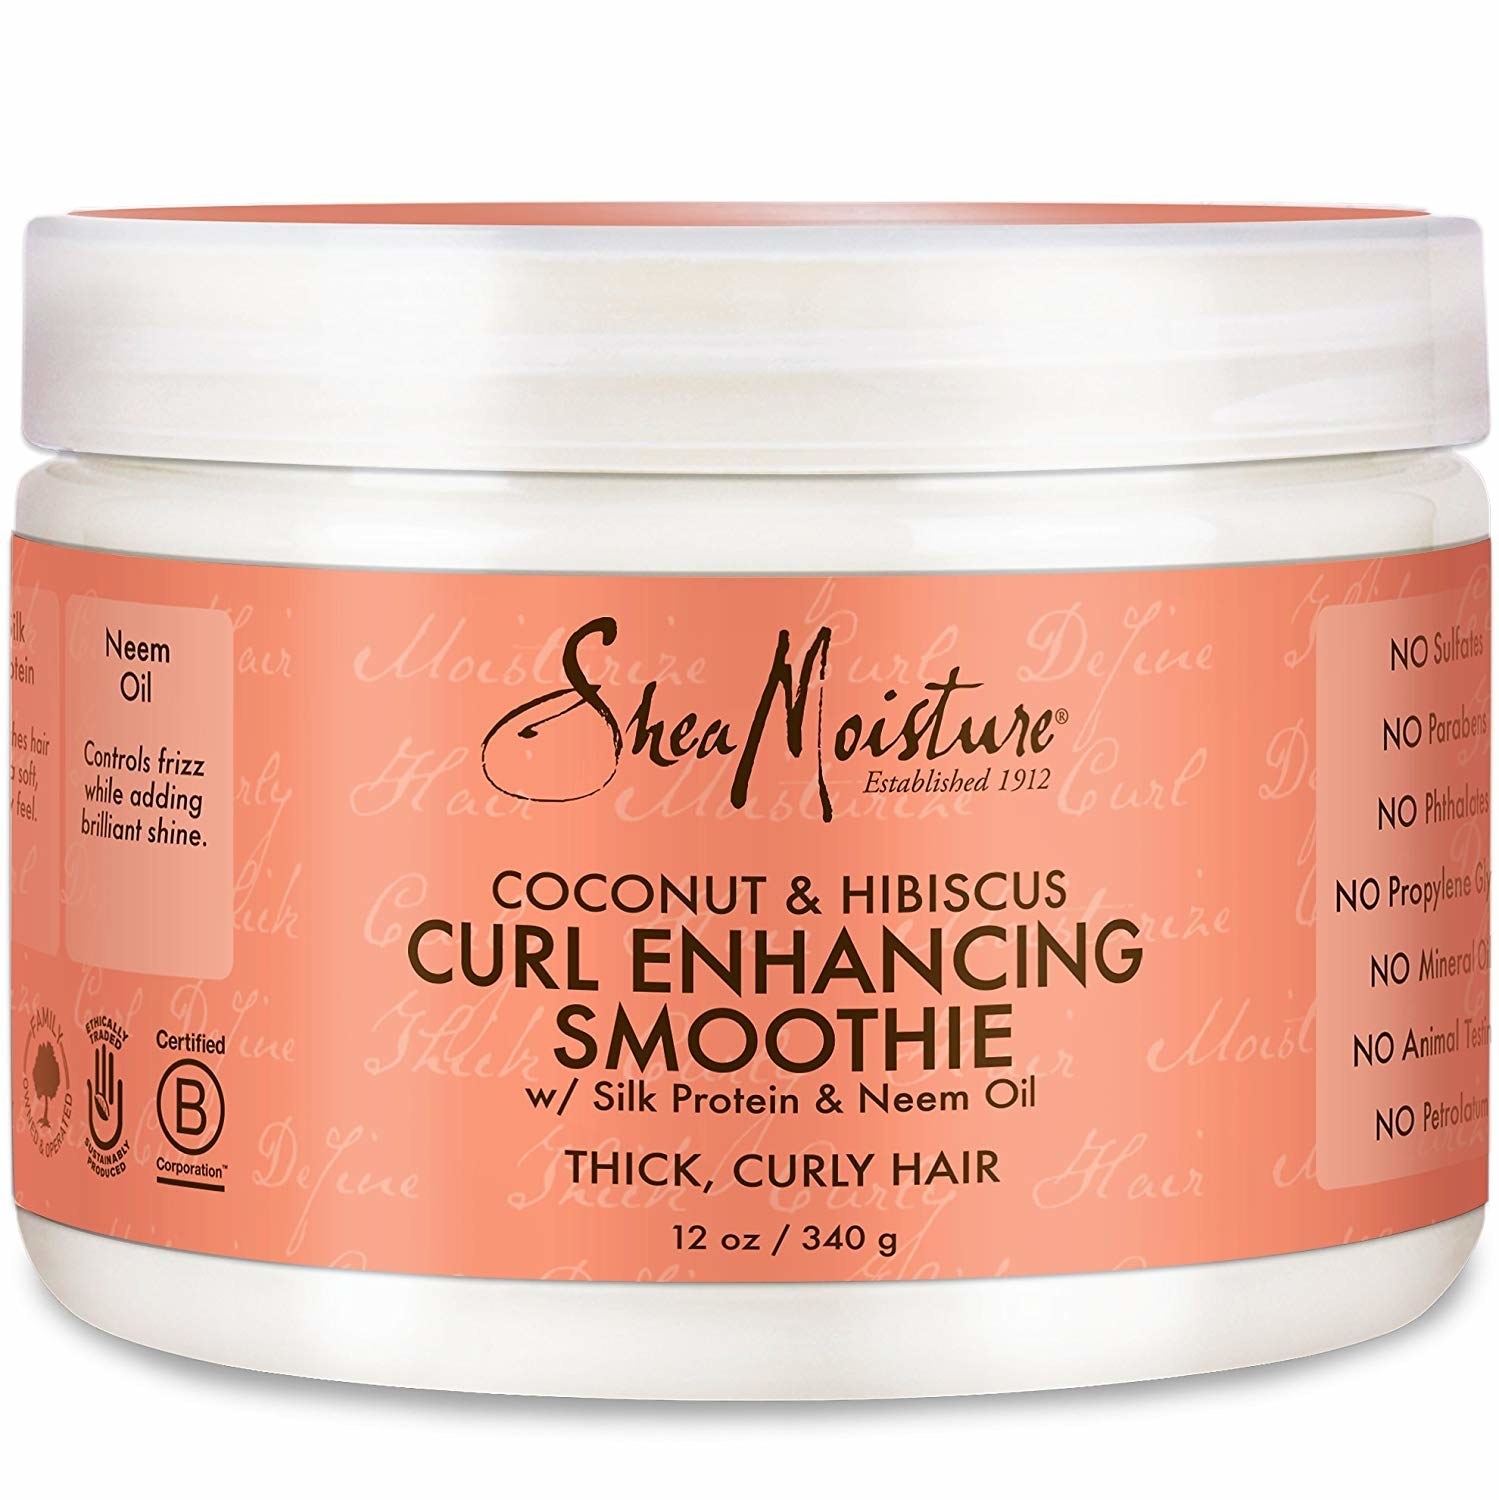 how to use curl enhancing smoothie for wavy hair